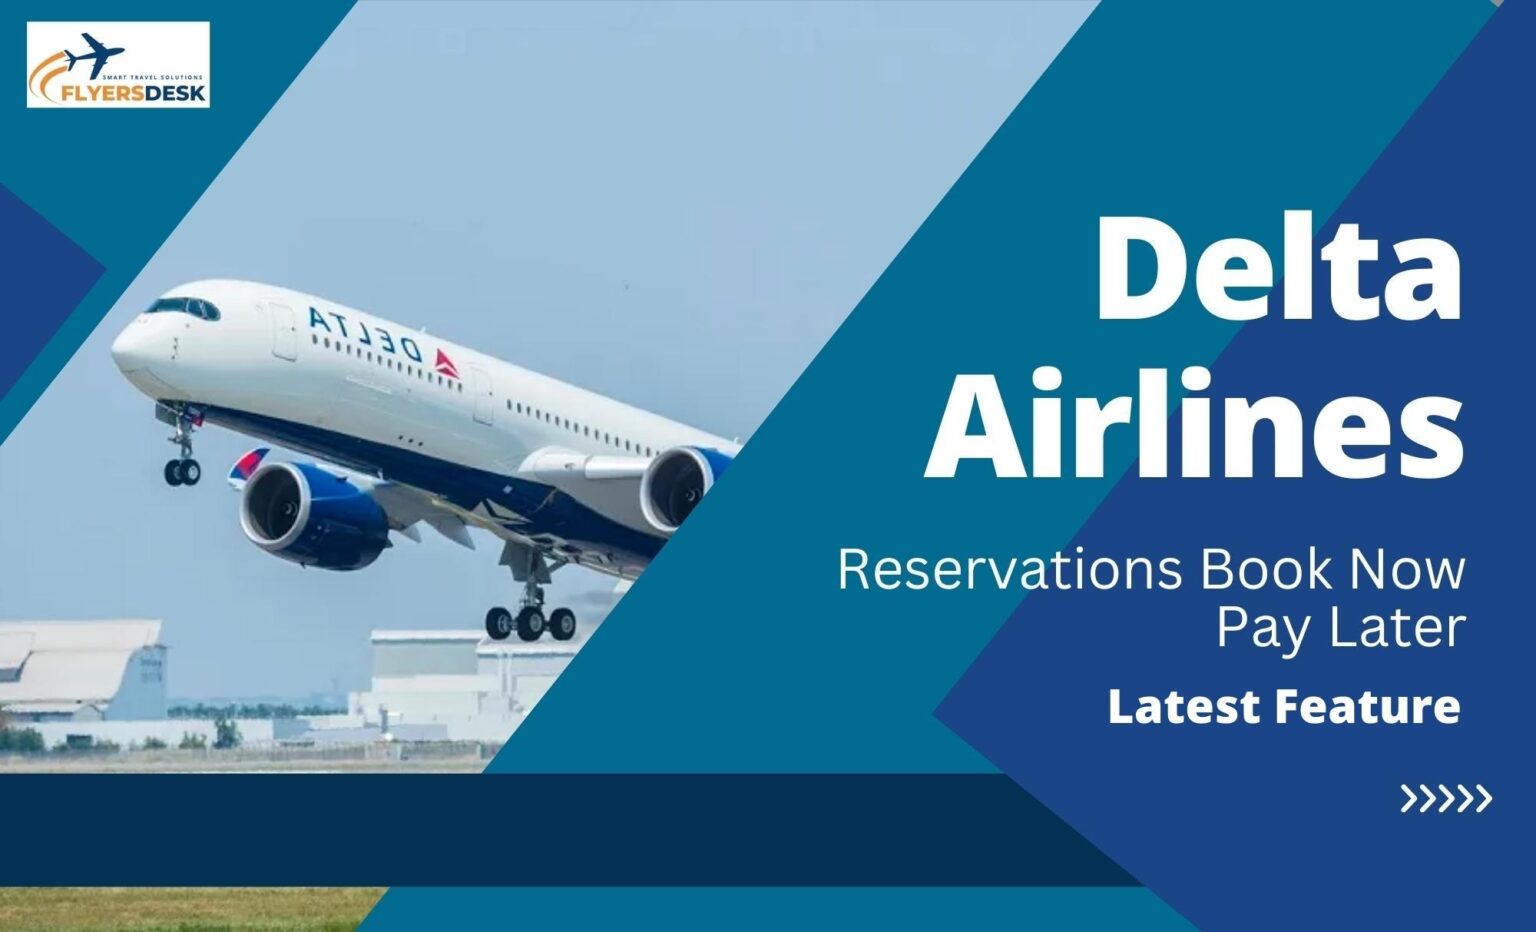 Delta Airlines Reservations Book Now Pay Later